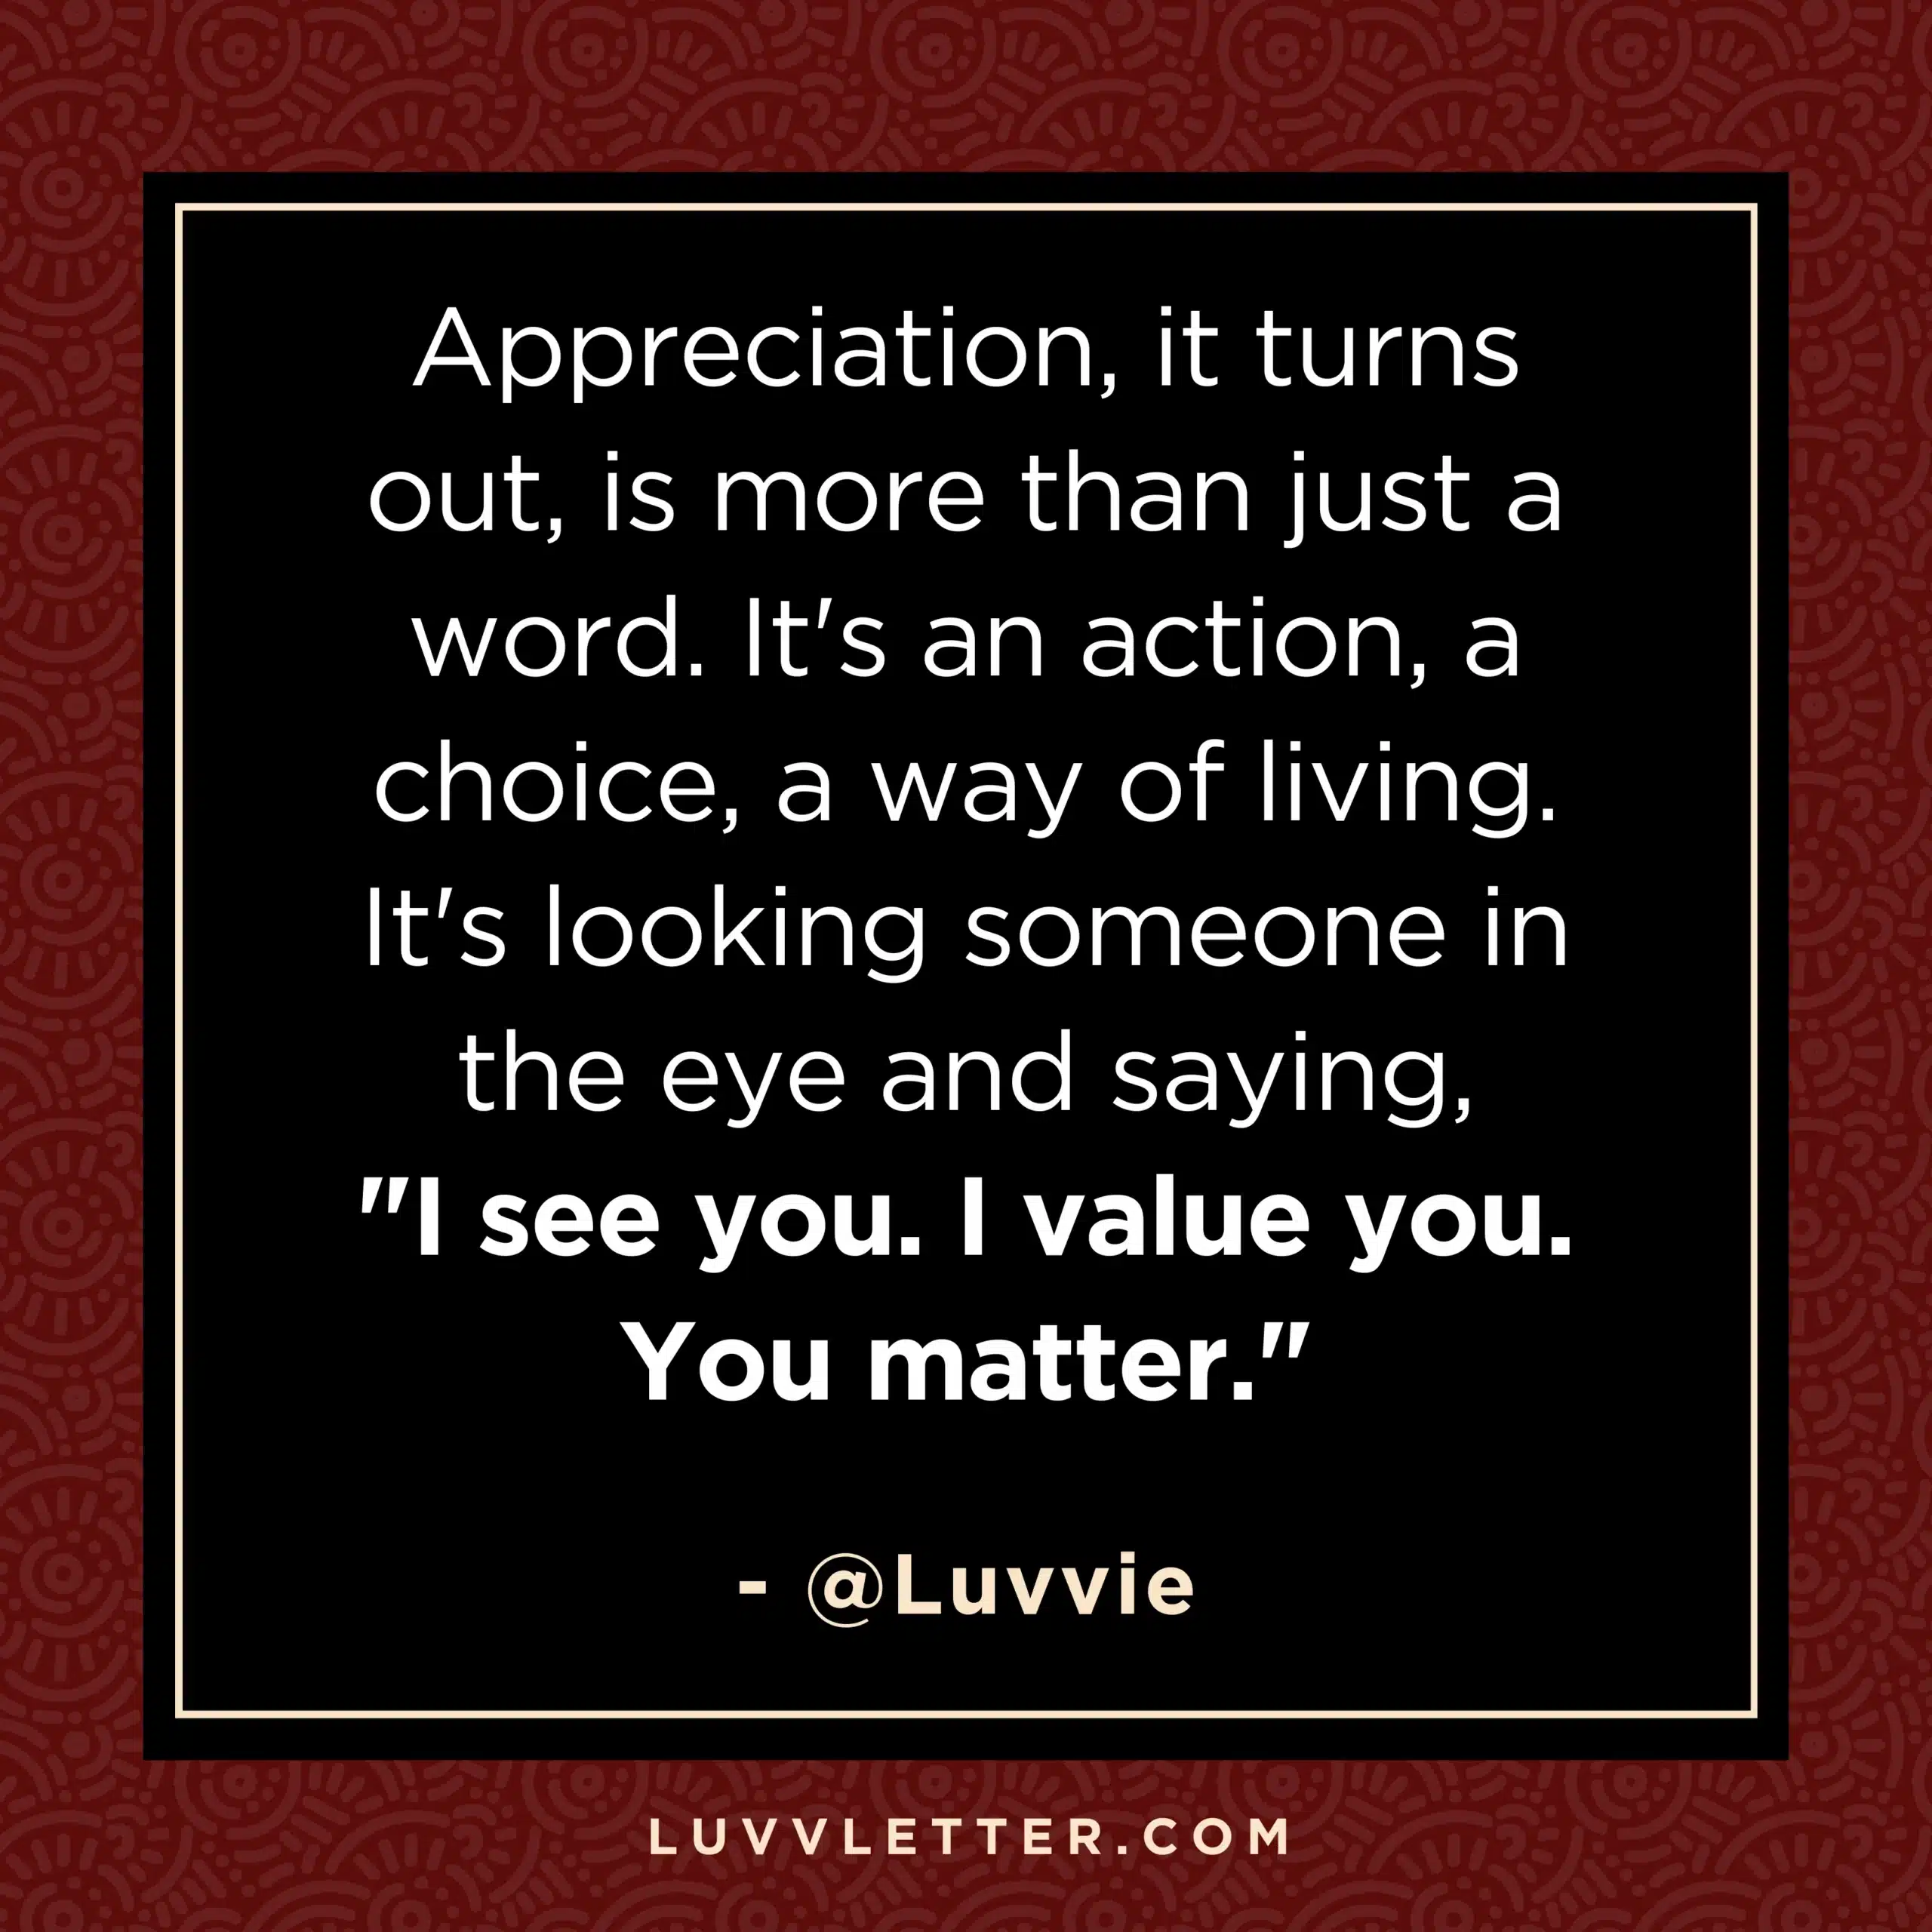 I see you, I value you, You matter - Quote Graphic